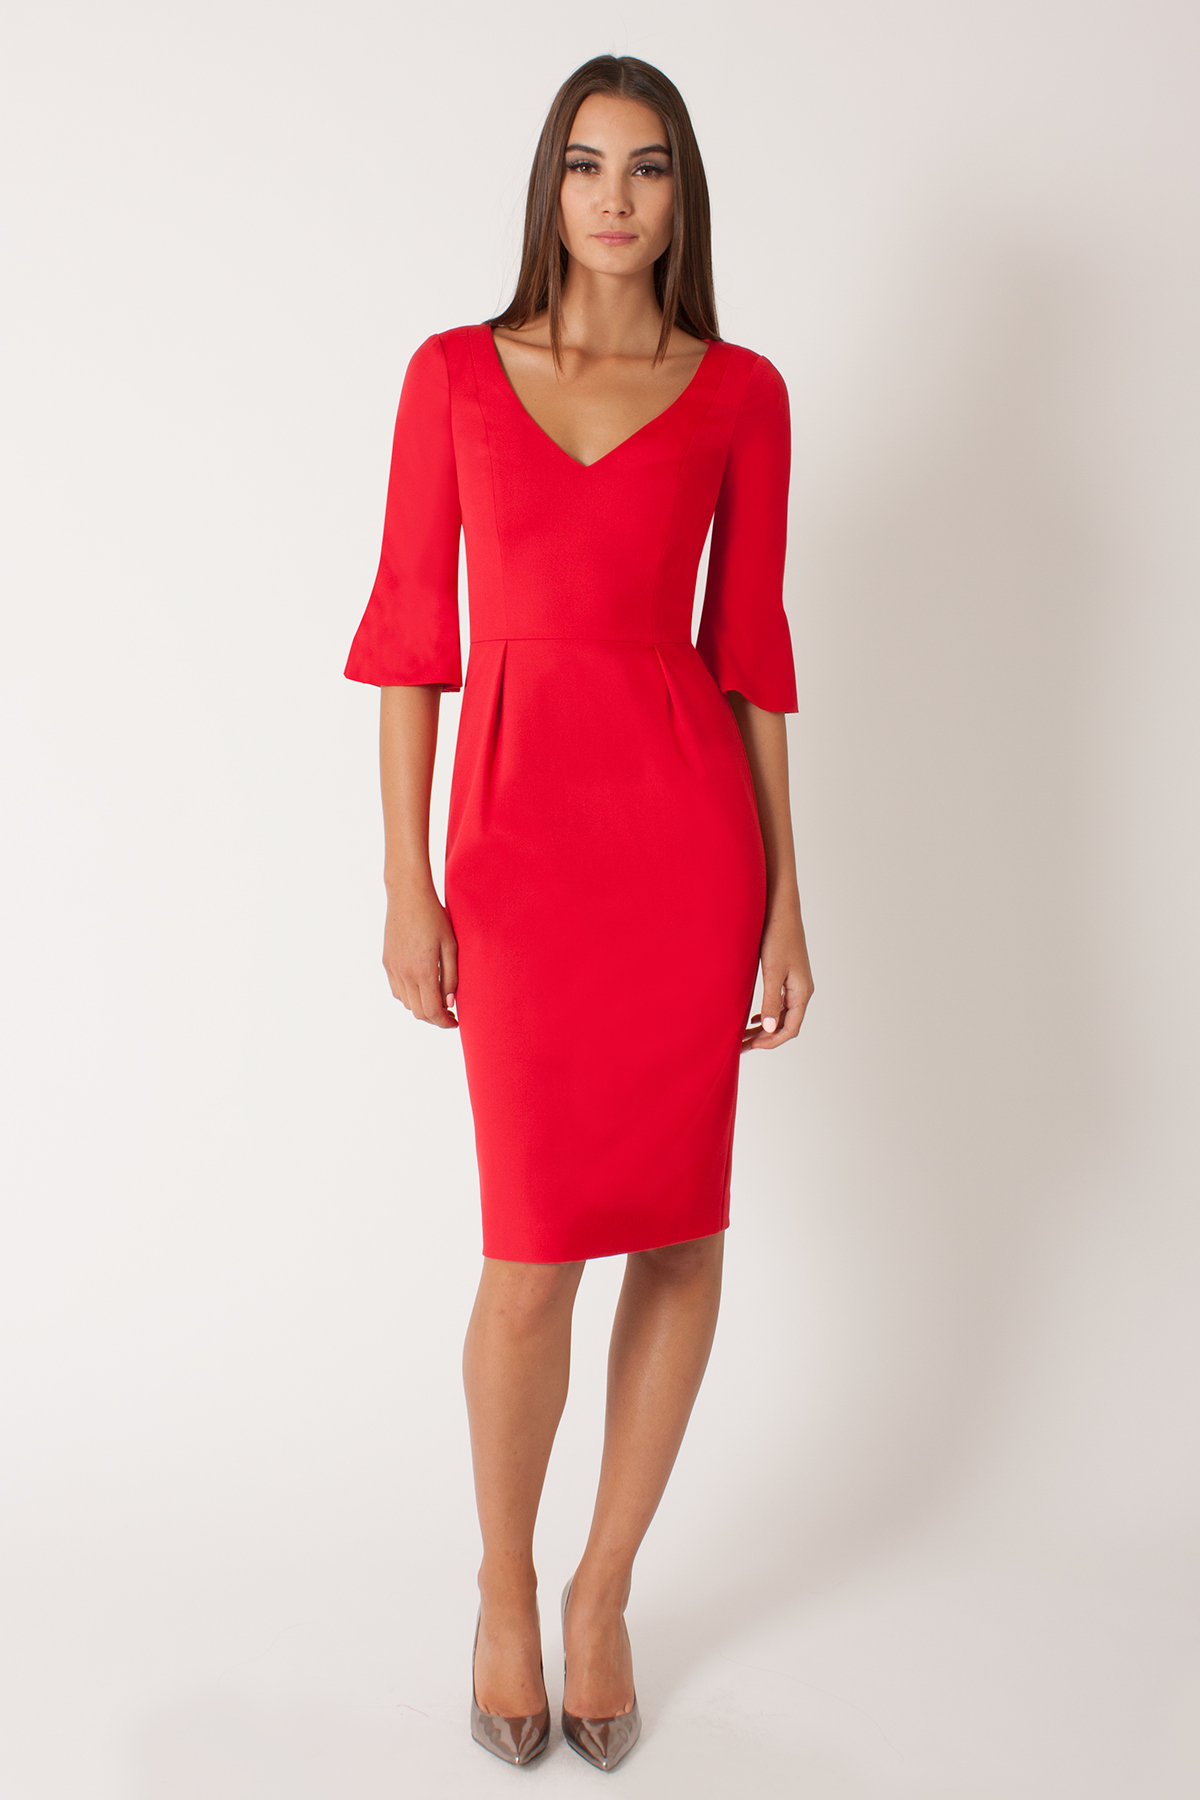 Lyst - Black Halo Adrienne Sheath Dress In Chic Red in Red1200 x 1800